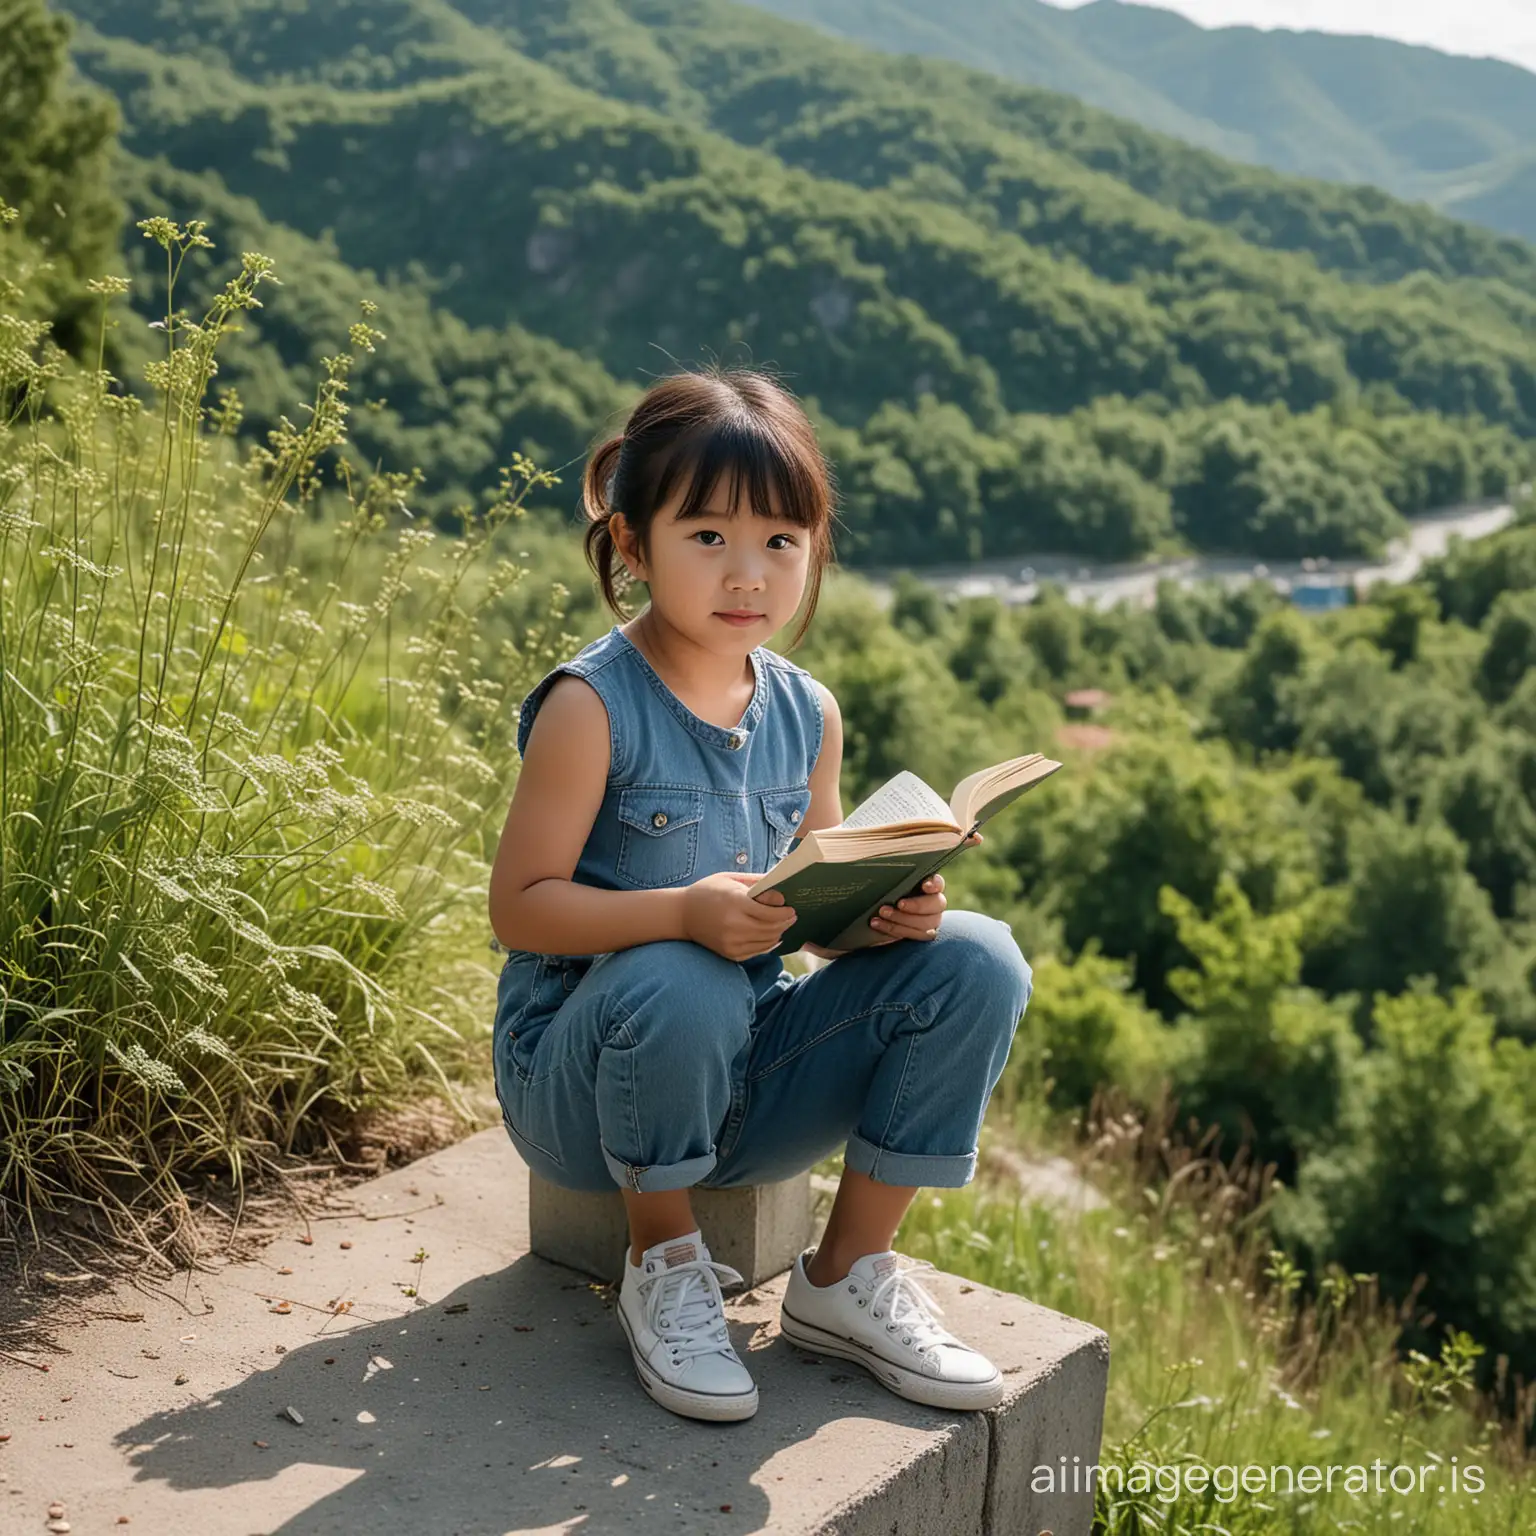 wide shoot photography, image of 3.5 years old Asian girl with short pony hair, round face, holding a book, wearing jeans and shoes, still image, on top of a hill with weeds and wild plants, bokeh background showing blue hills and forest in the distance, dynamic lighting, handsome pose , sitting on a bench made of concrete, a long and high bench made of cement, looking at the camera